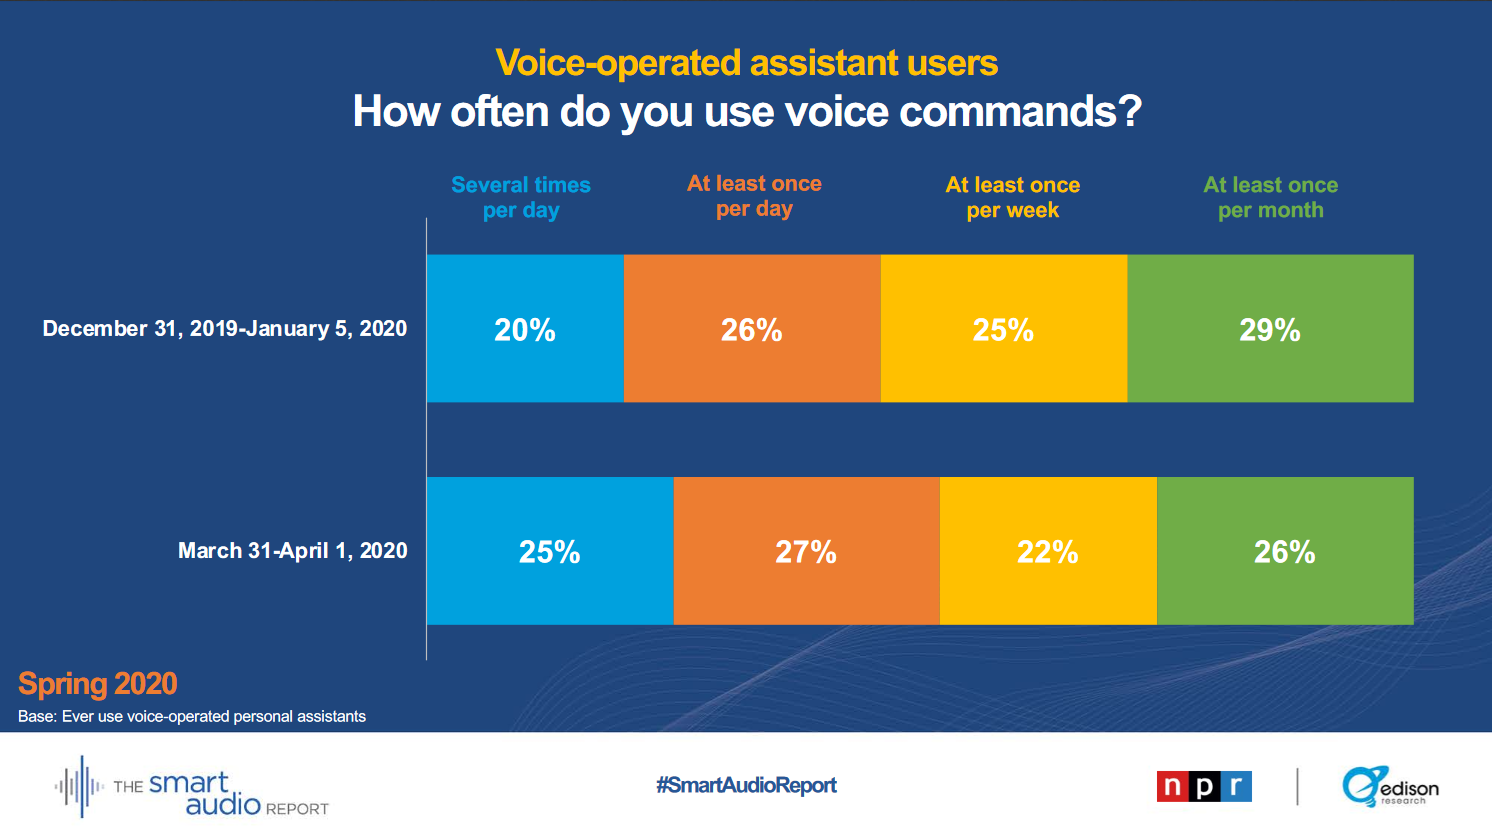 Everything you need to know about voice assistants